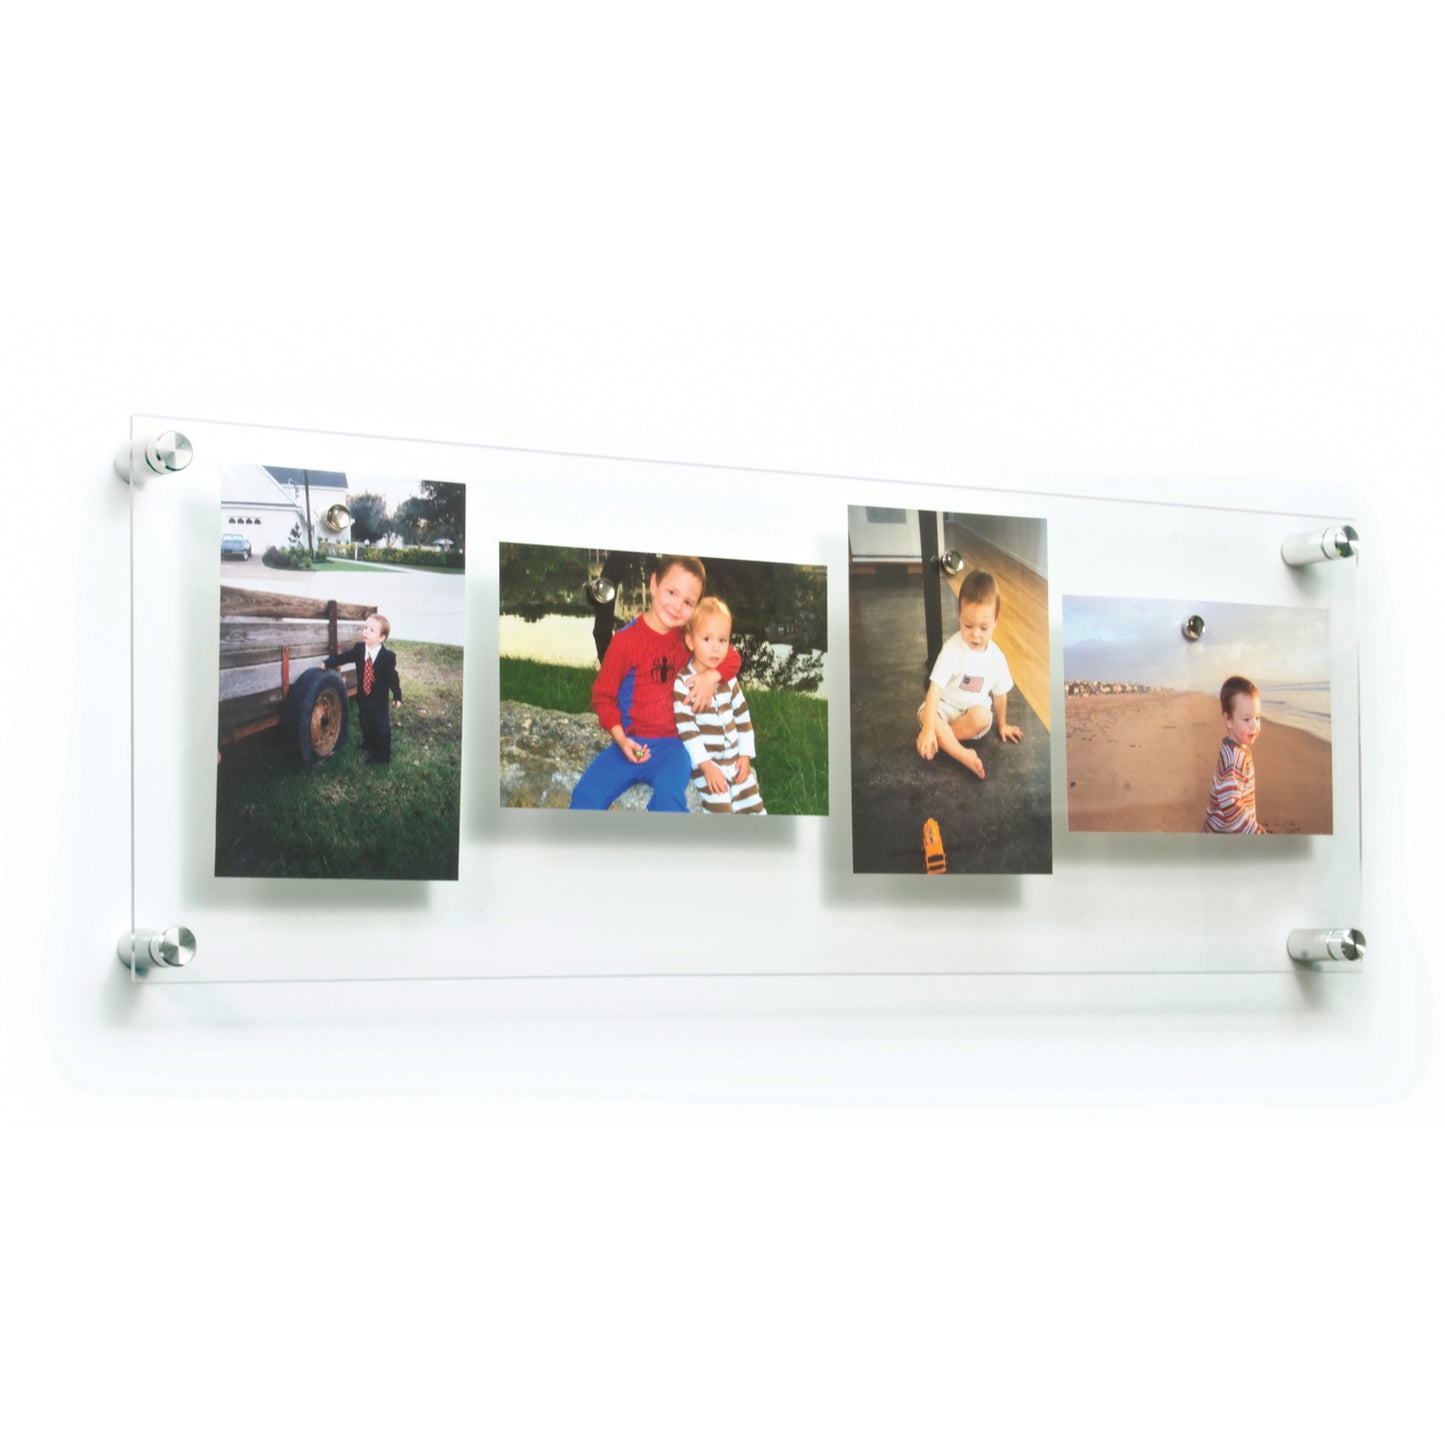 23" x 8" Panoramic Easy-Change Float Frame + Magnets for 5" x 7" Art